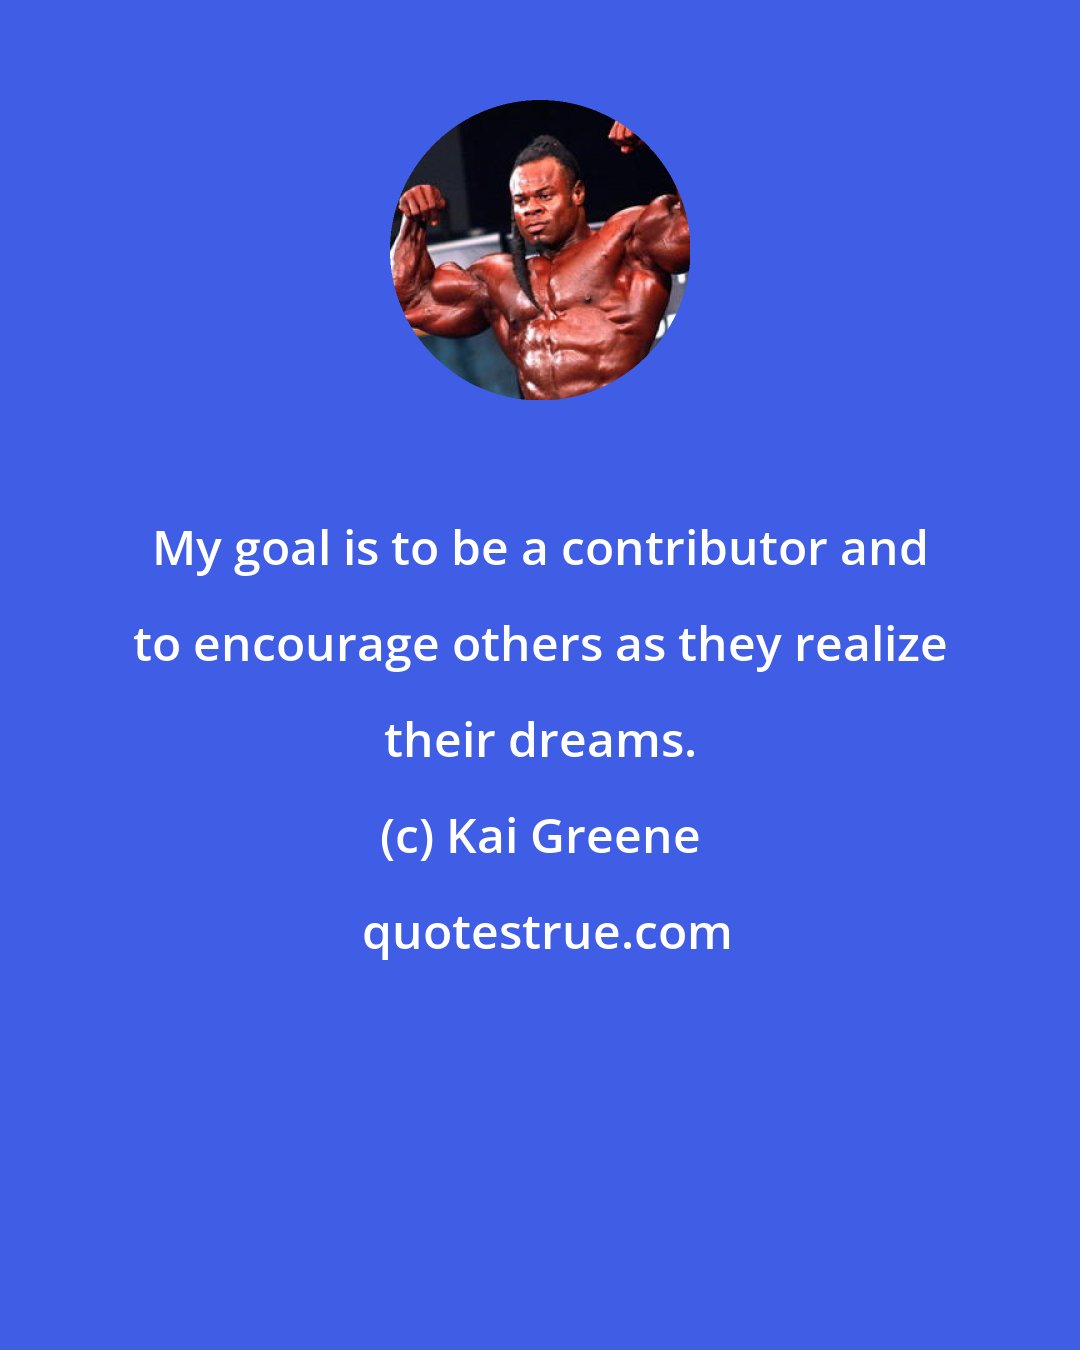 Kai Greene: My goal is to be a contributor and to encourage others as they realize their dreams.